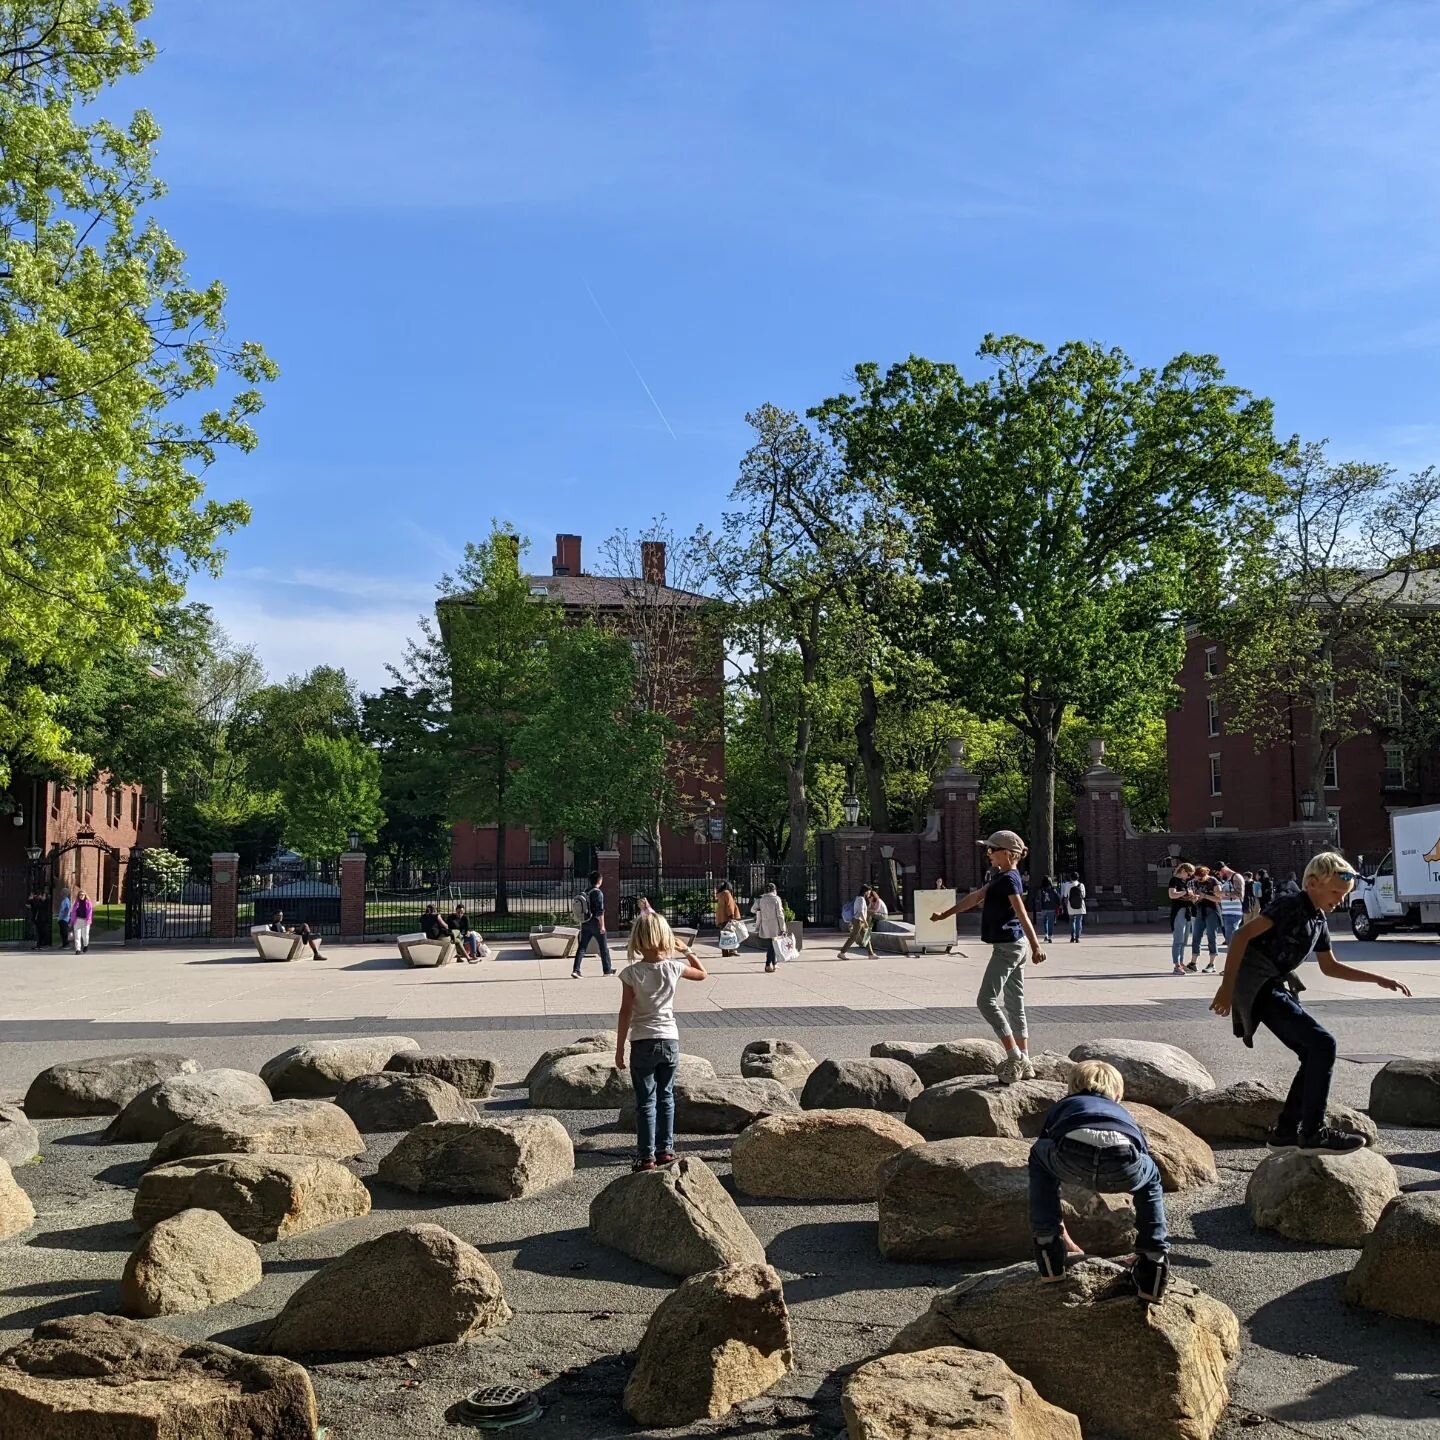 Once at the  East Coast of the USA, we decided to  also visit Boston, including Harvard University which is surrounded by a very friendly beautiful square and of course its famous Harvard Bookstore. We catched up with our friends from Carolina who we